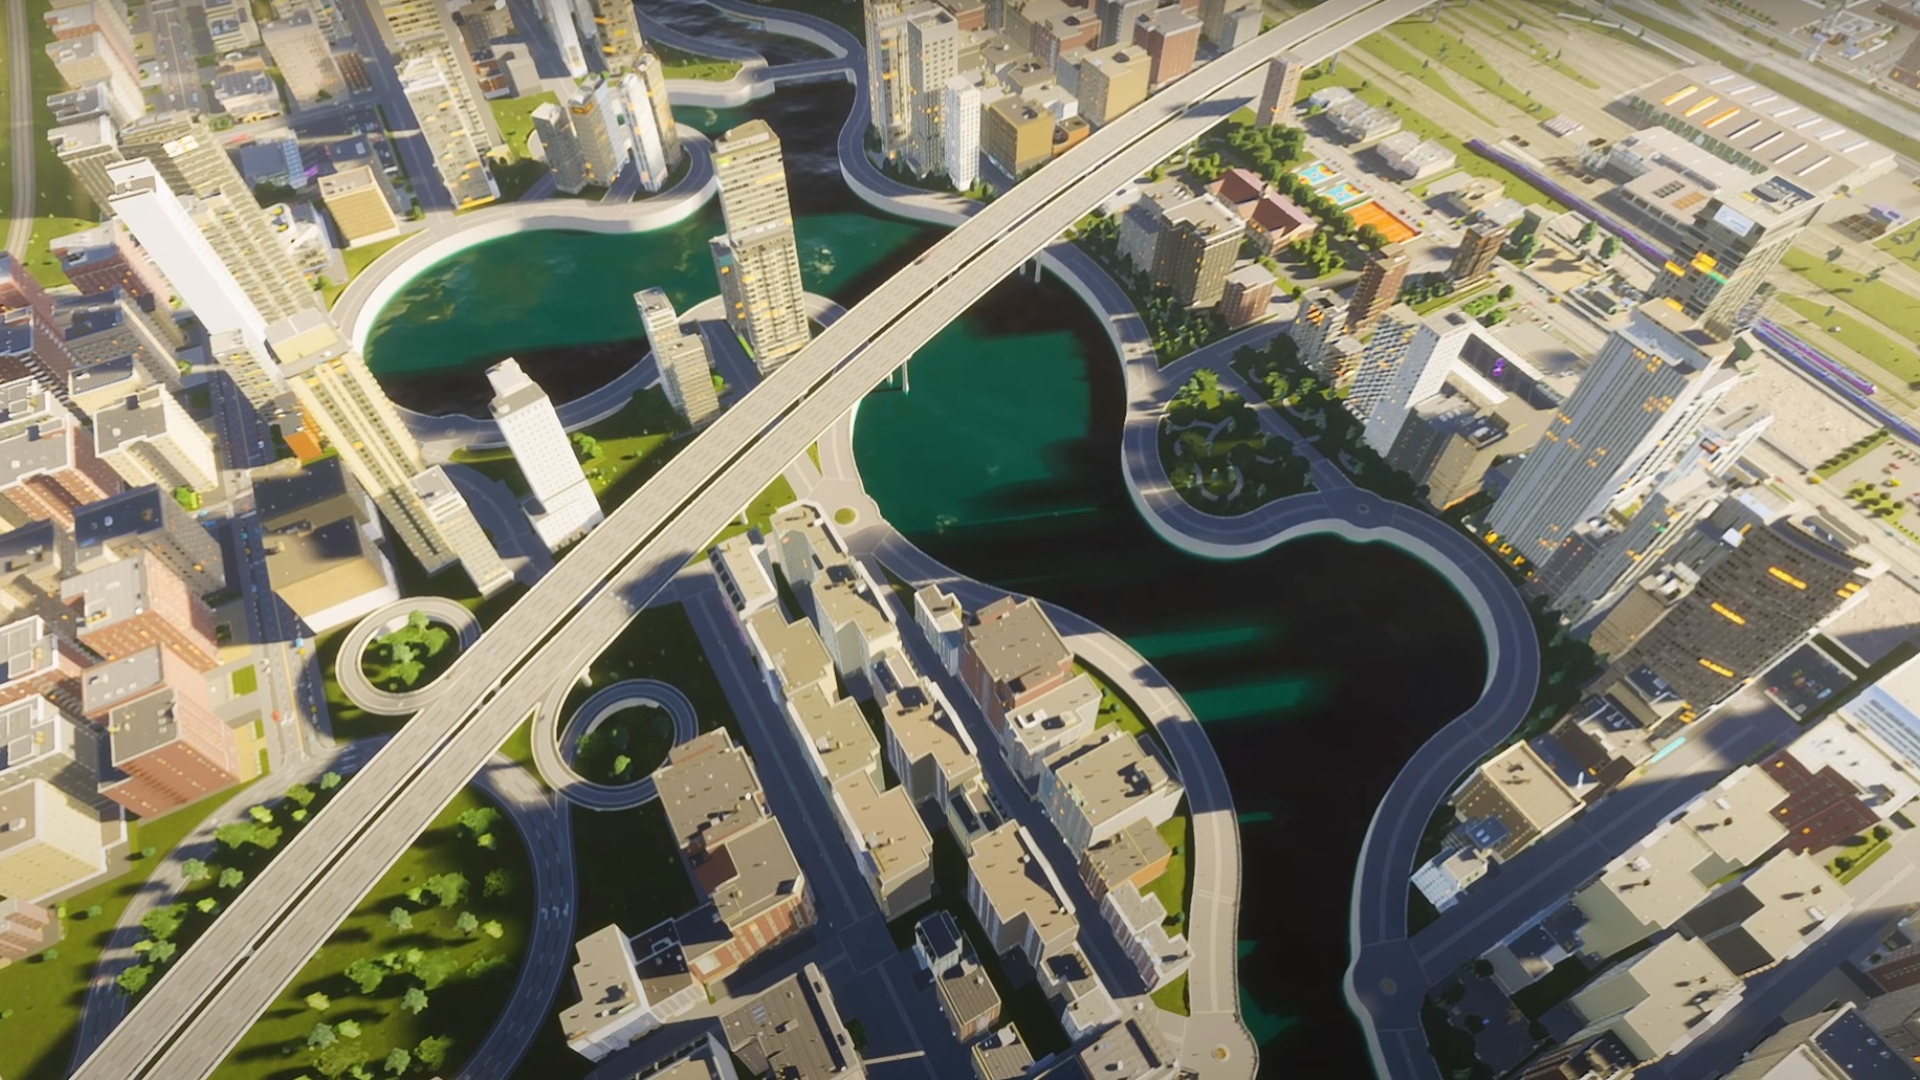 Cities: Skylines 2 review: Building a better sequel